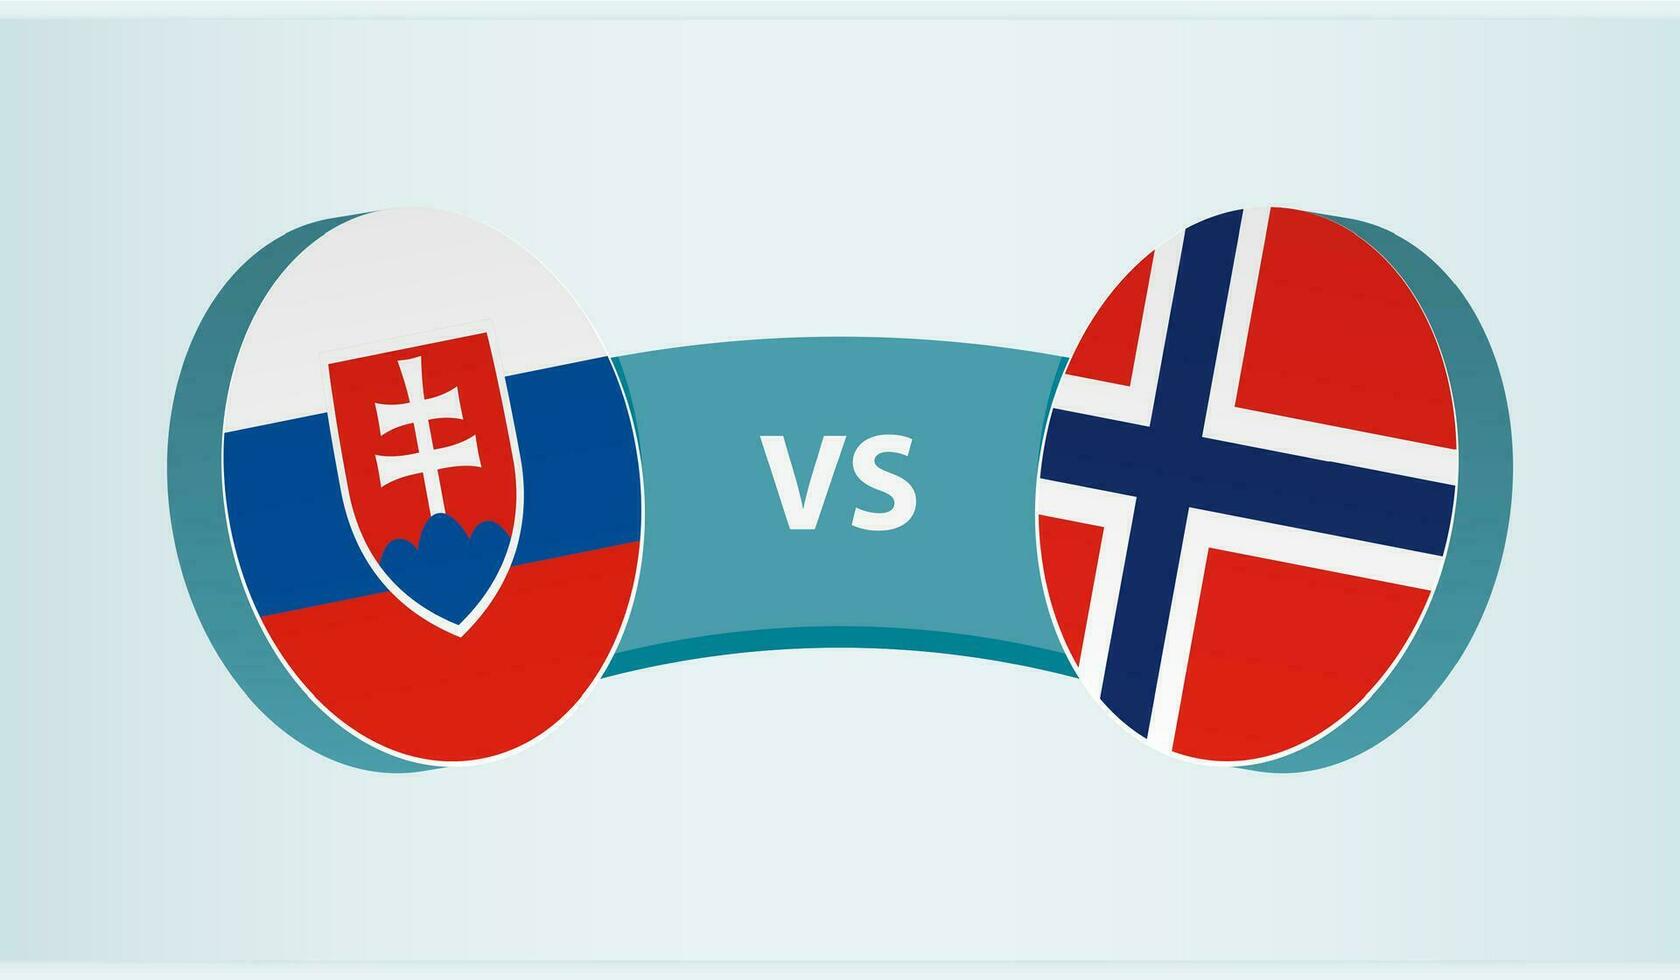 Slovakia versus Norway, team sports competition concept. vector